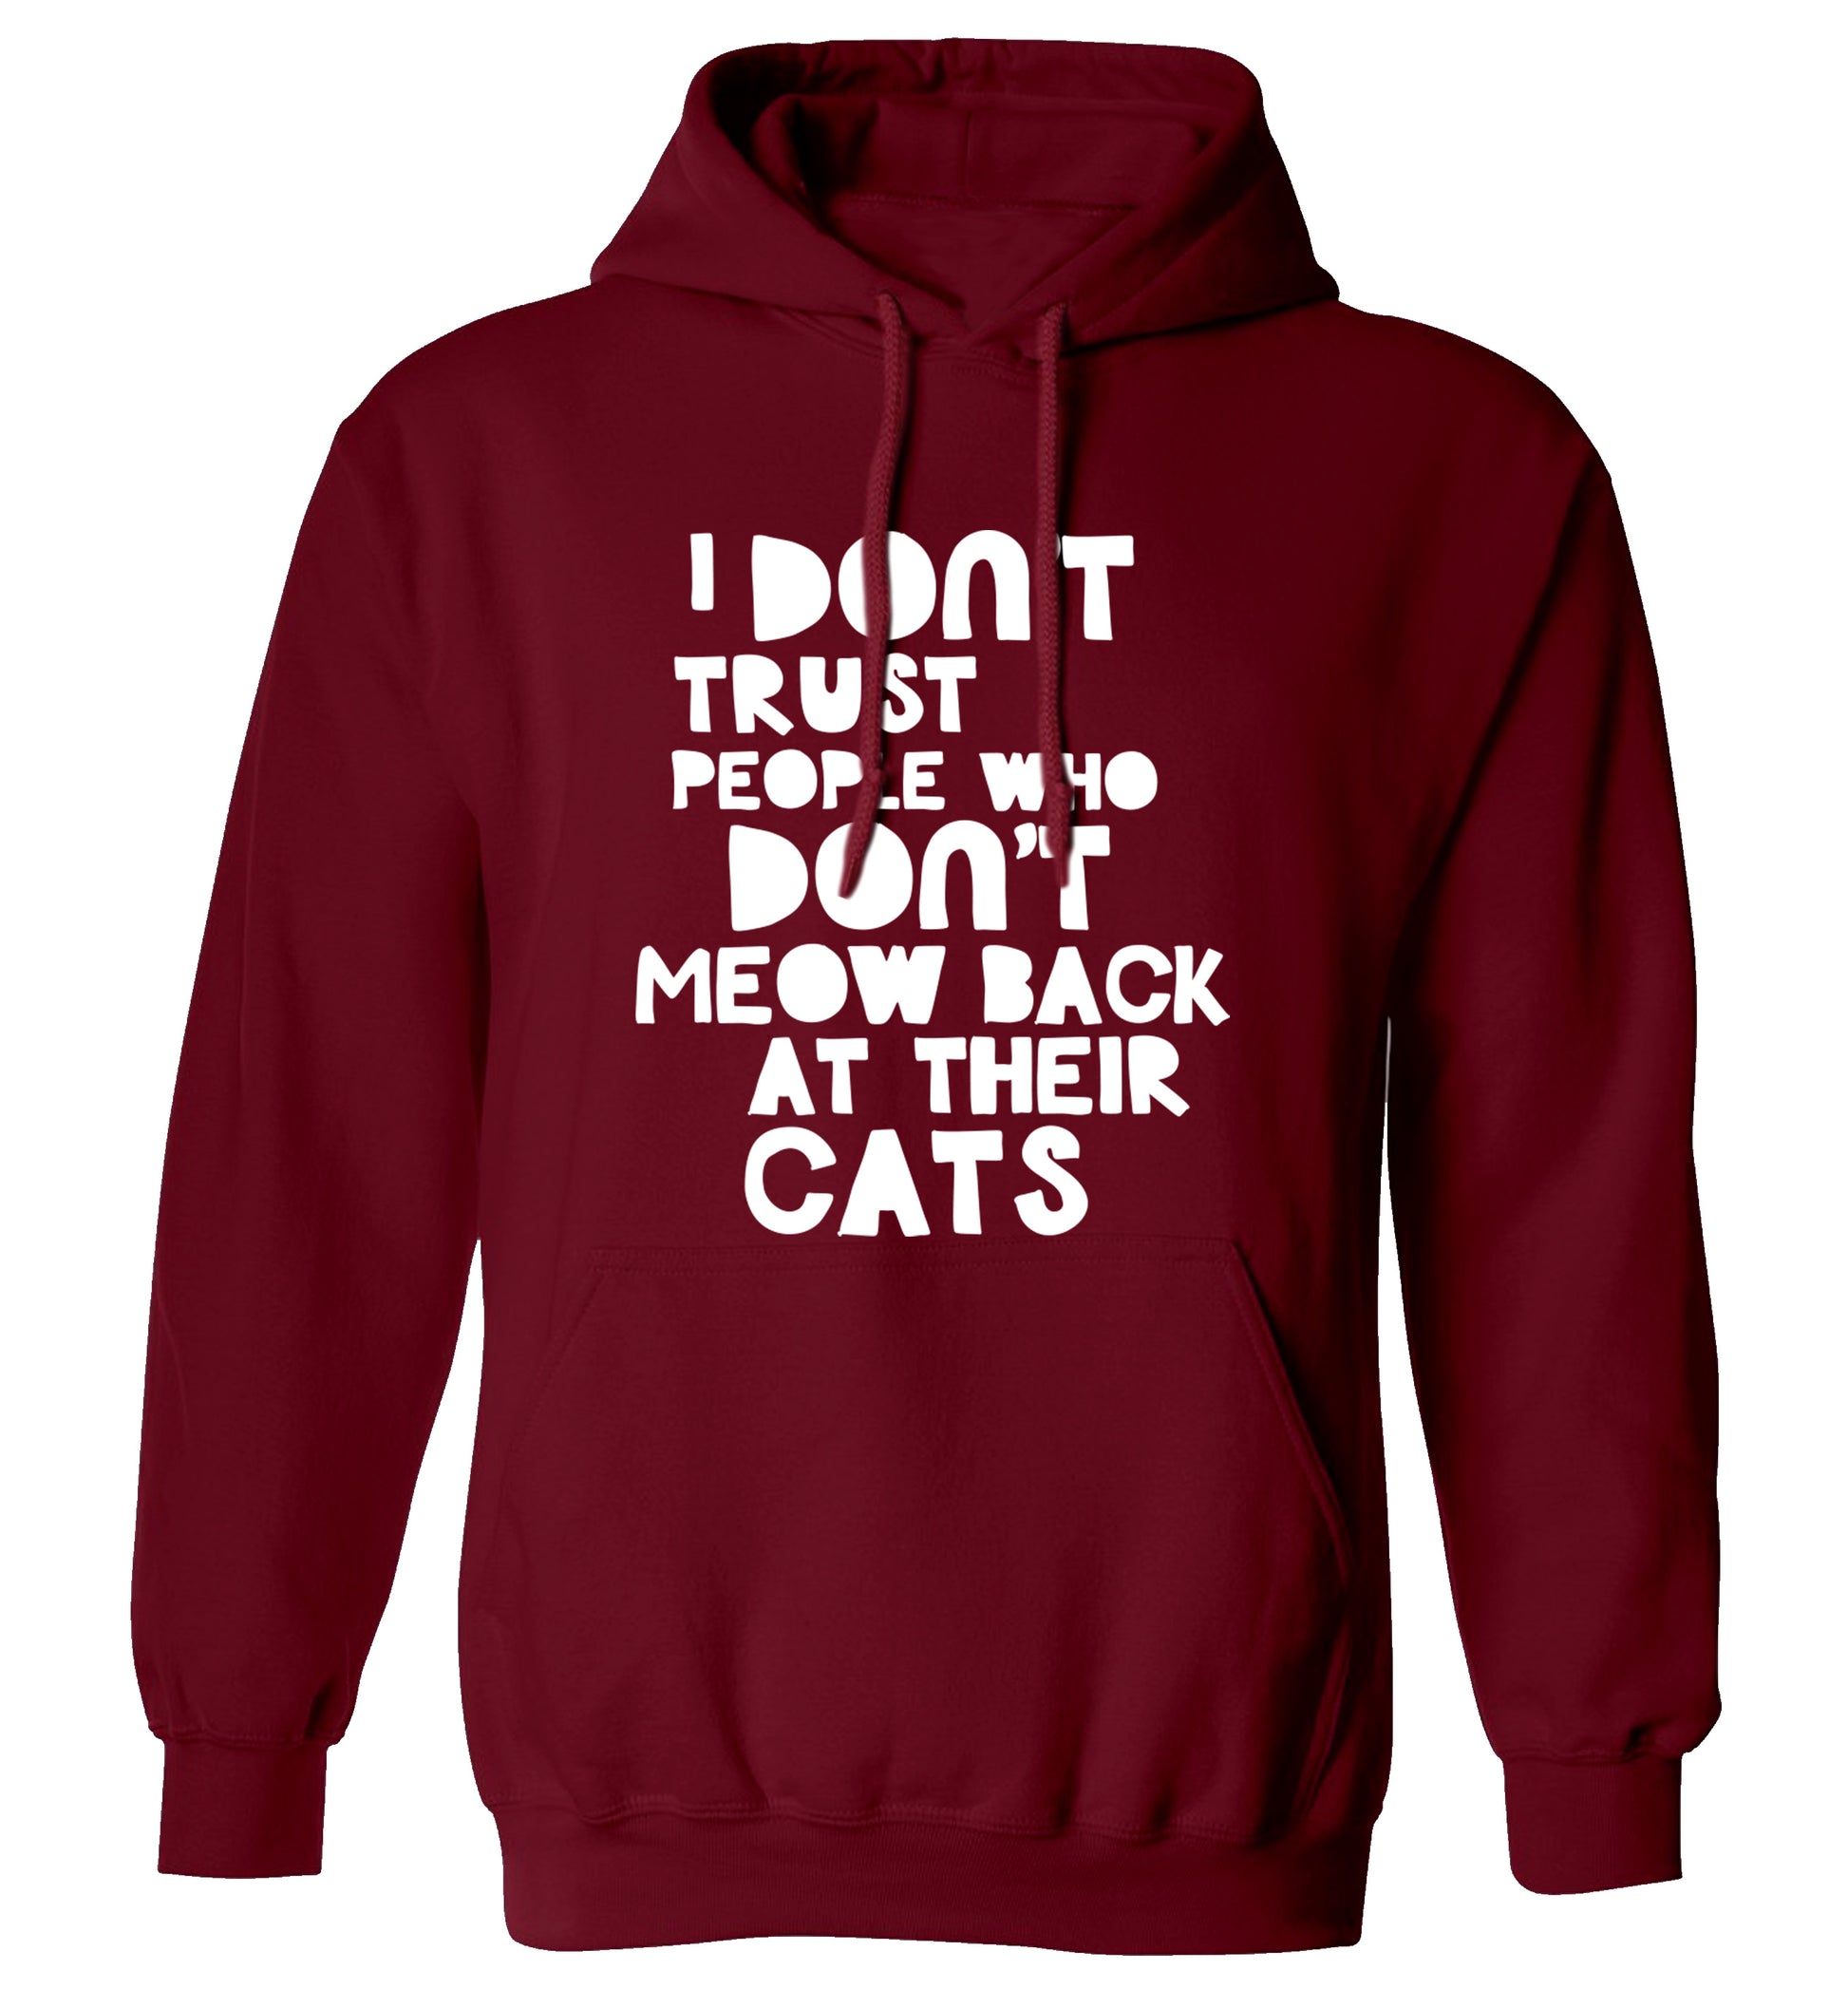 I don't trust people who don't meow back at their cats adults unisex maroon hoodie 2XL